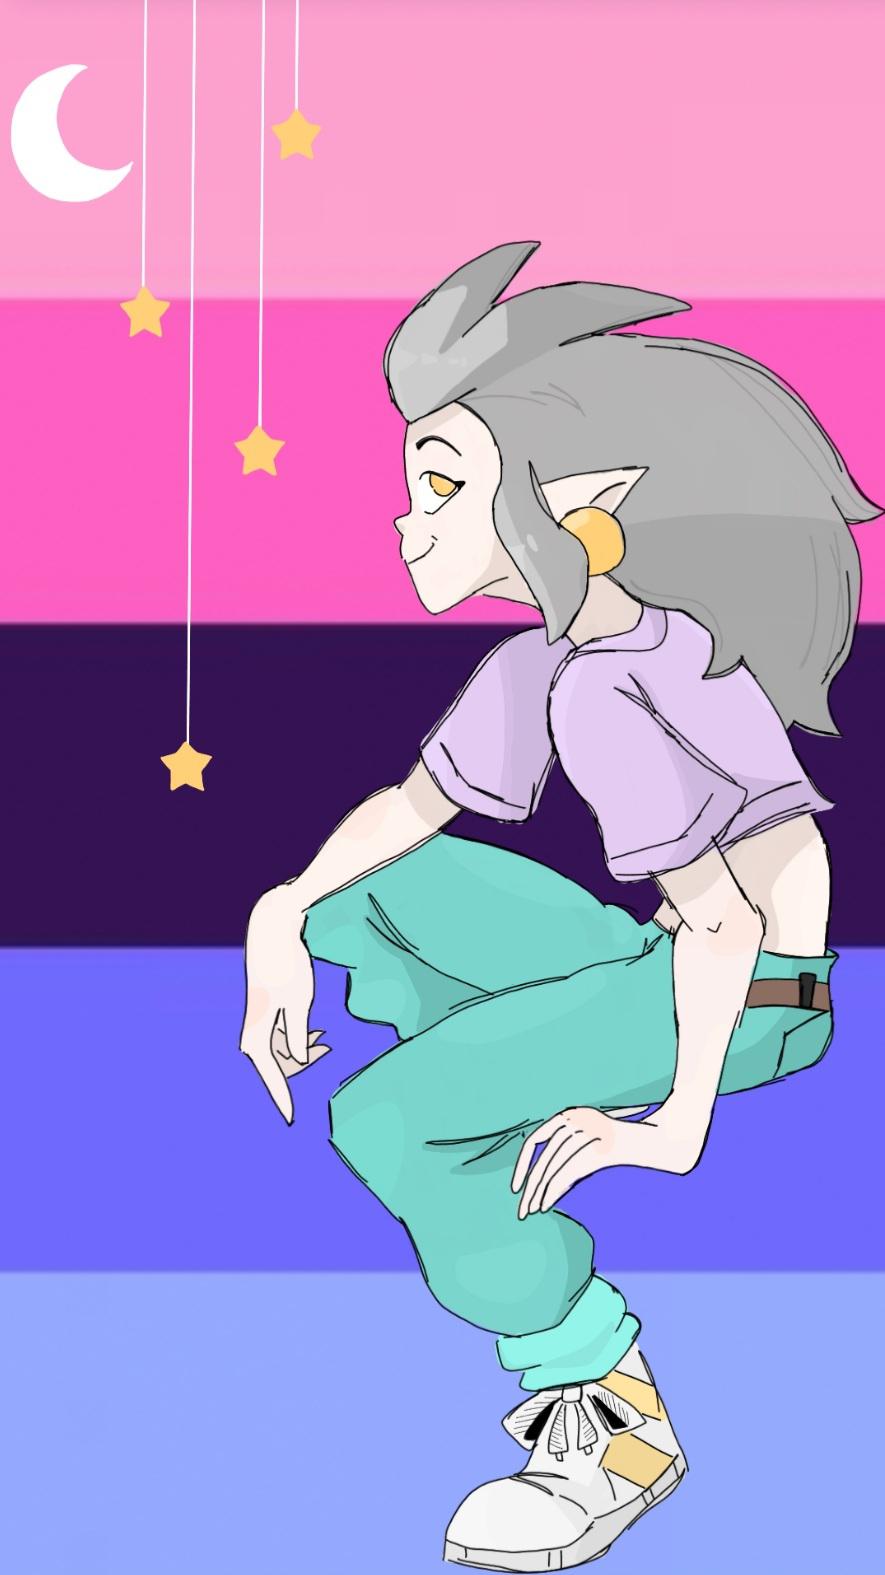 Part 3 of me drawing LGBT+ characters a wallpaper thingy: Eda (+omni flag as requested)